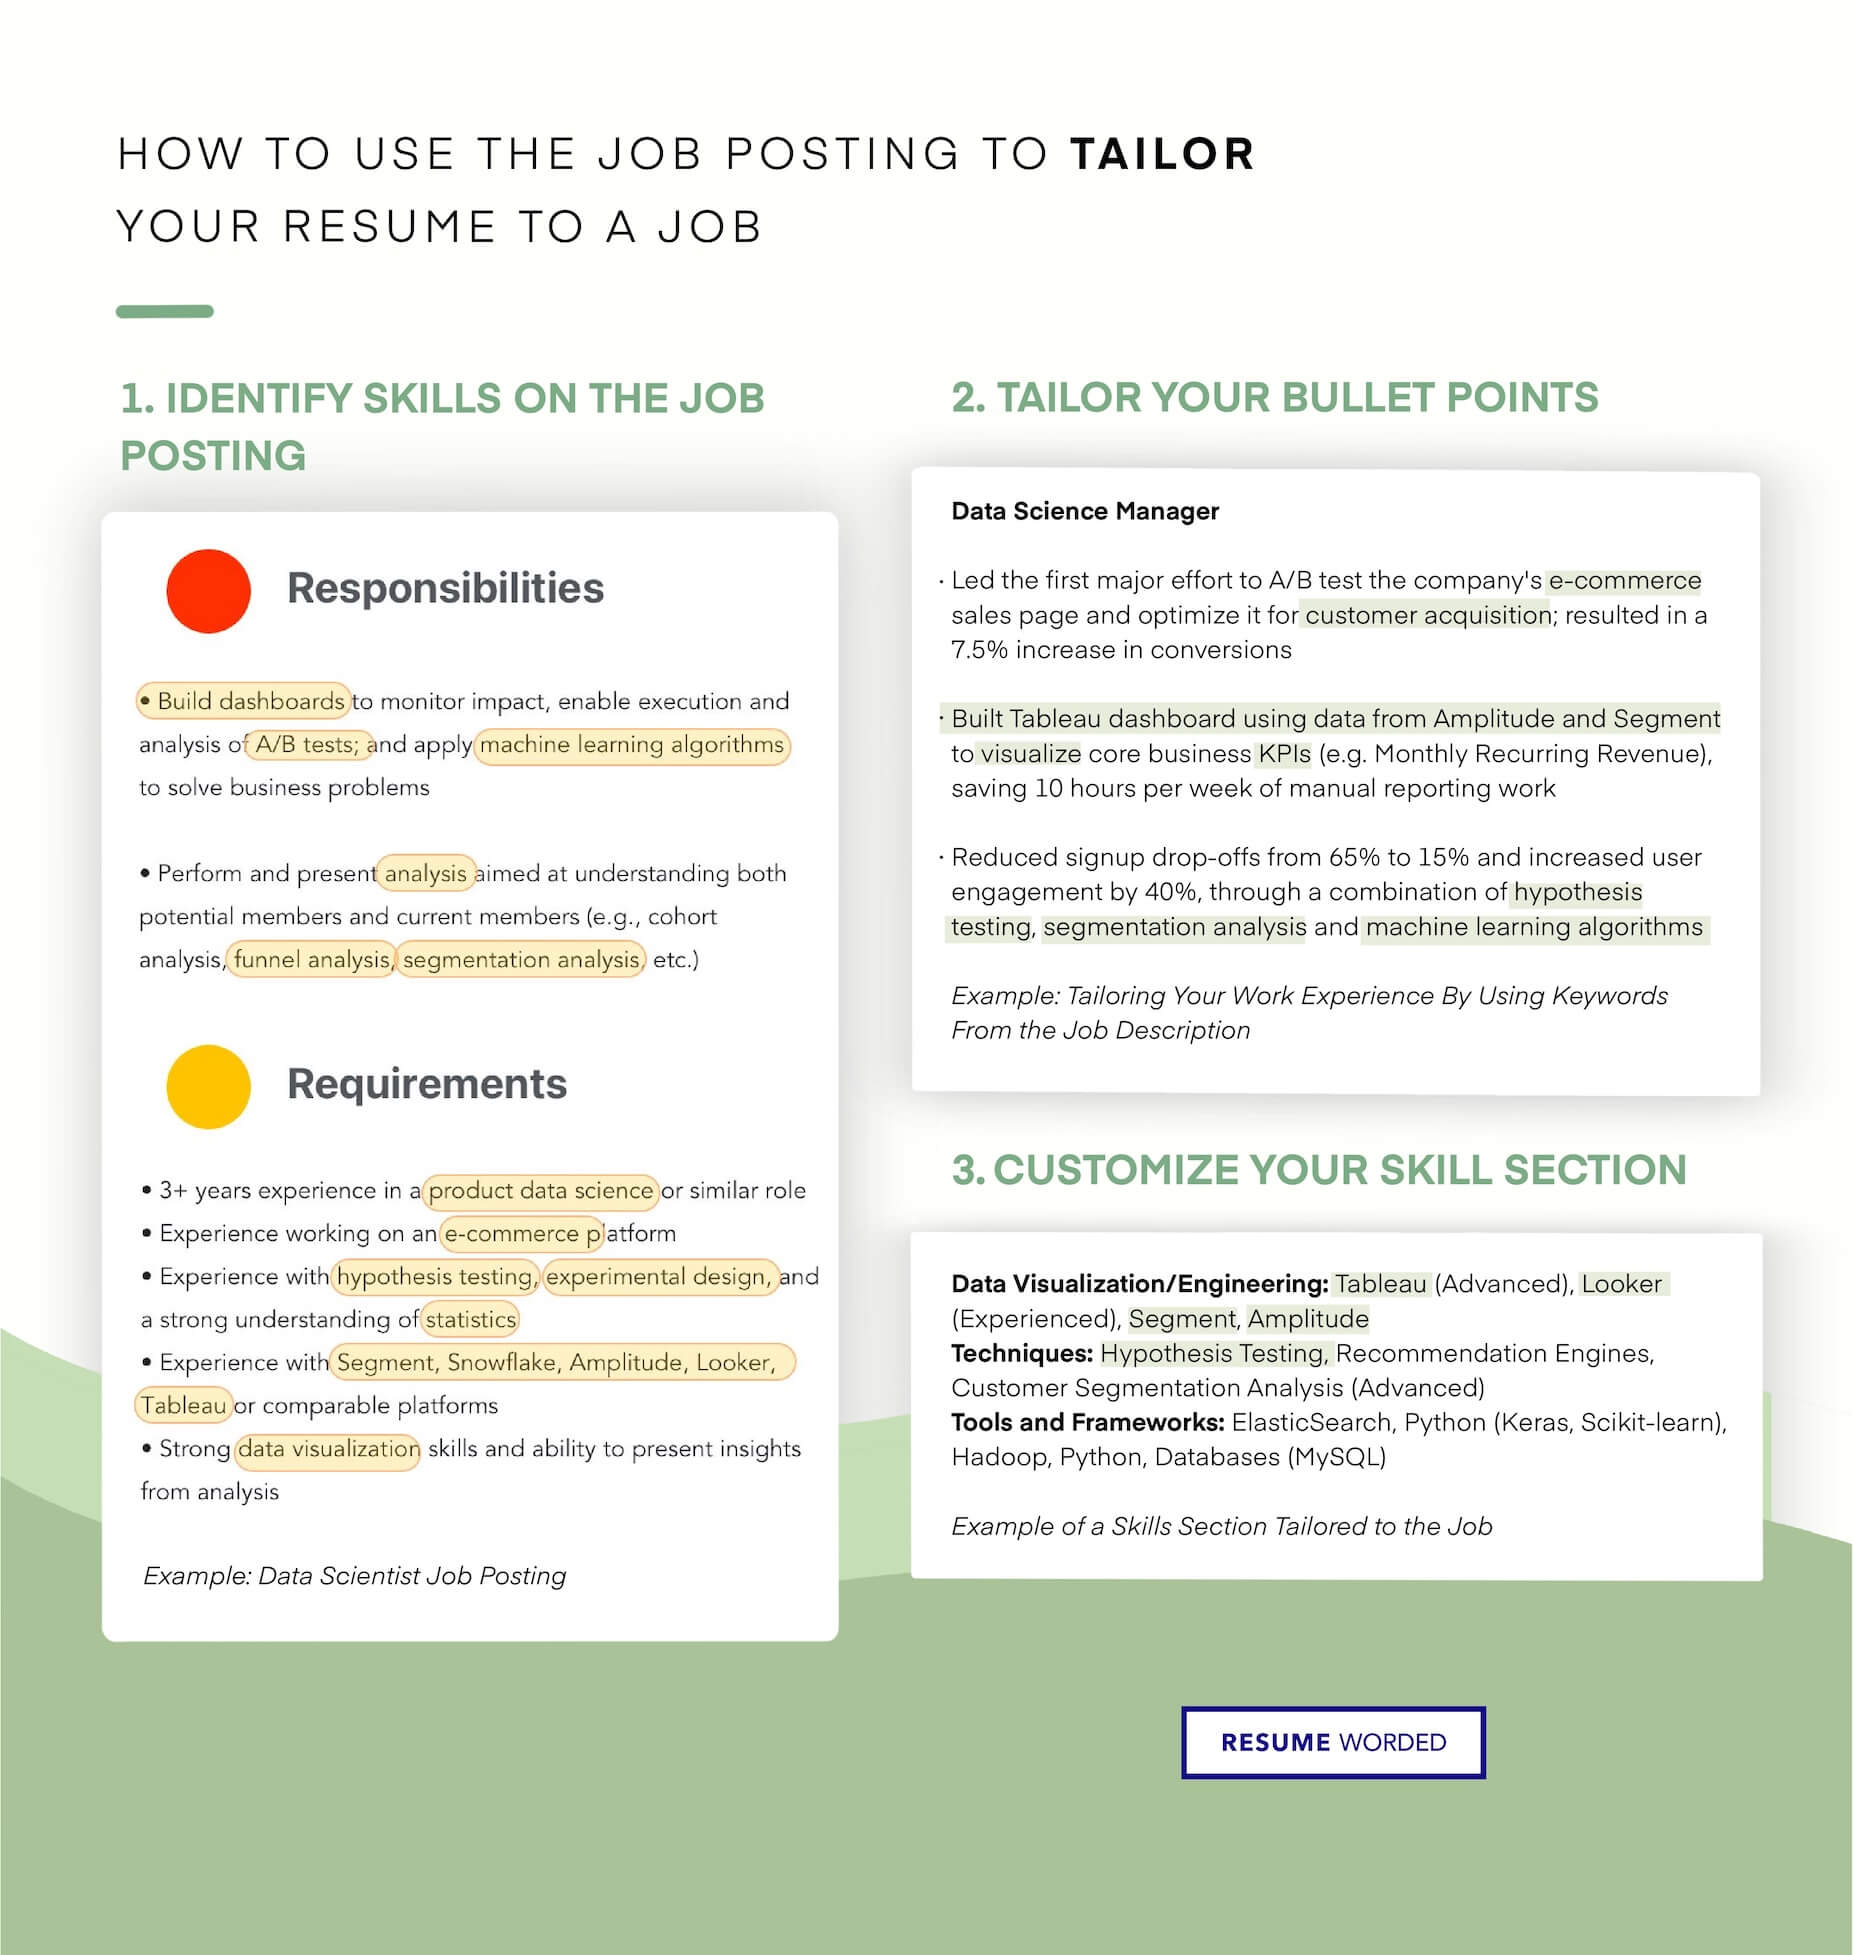 Tailored to the agile job - Agile Product Owner Resume